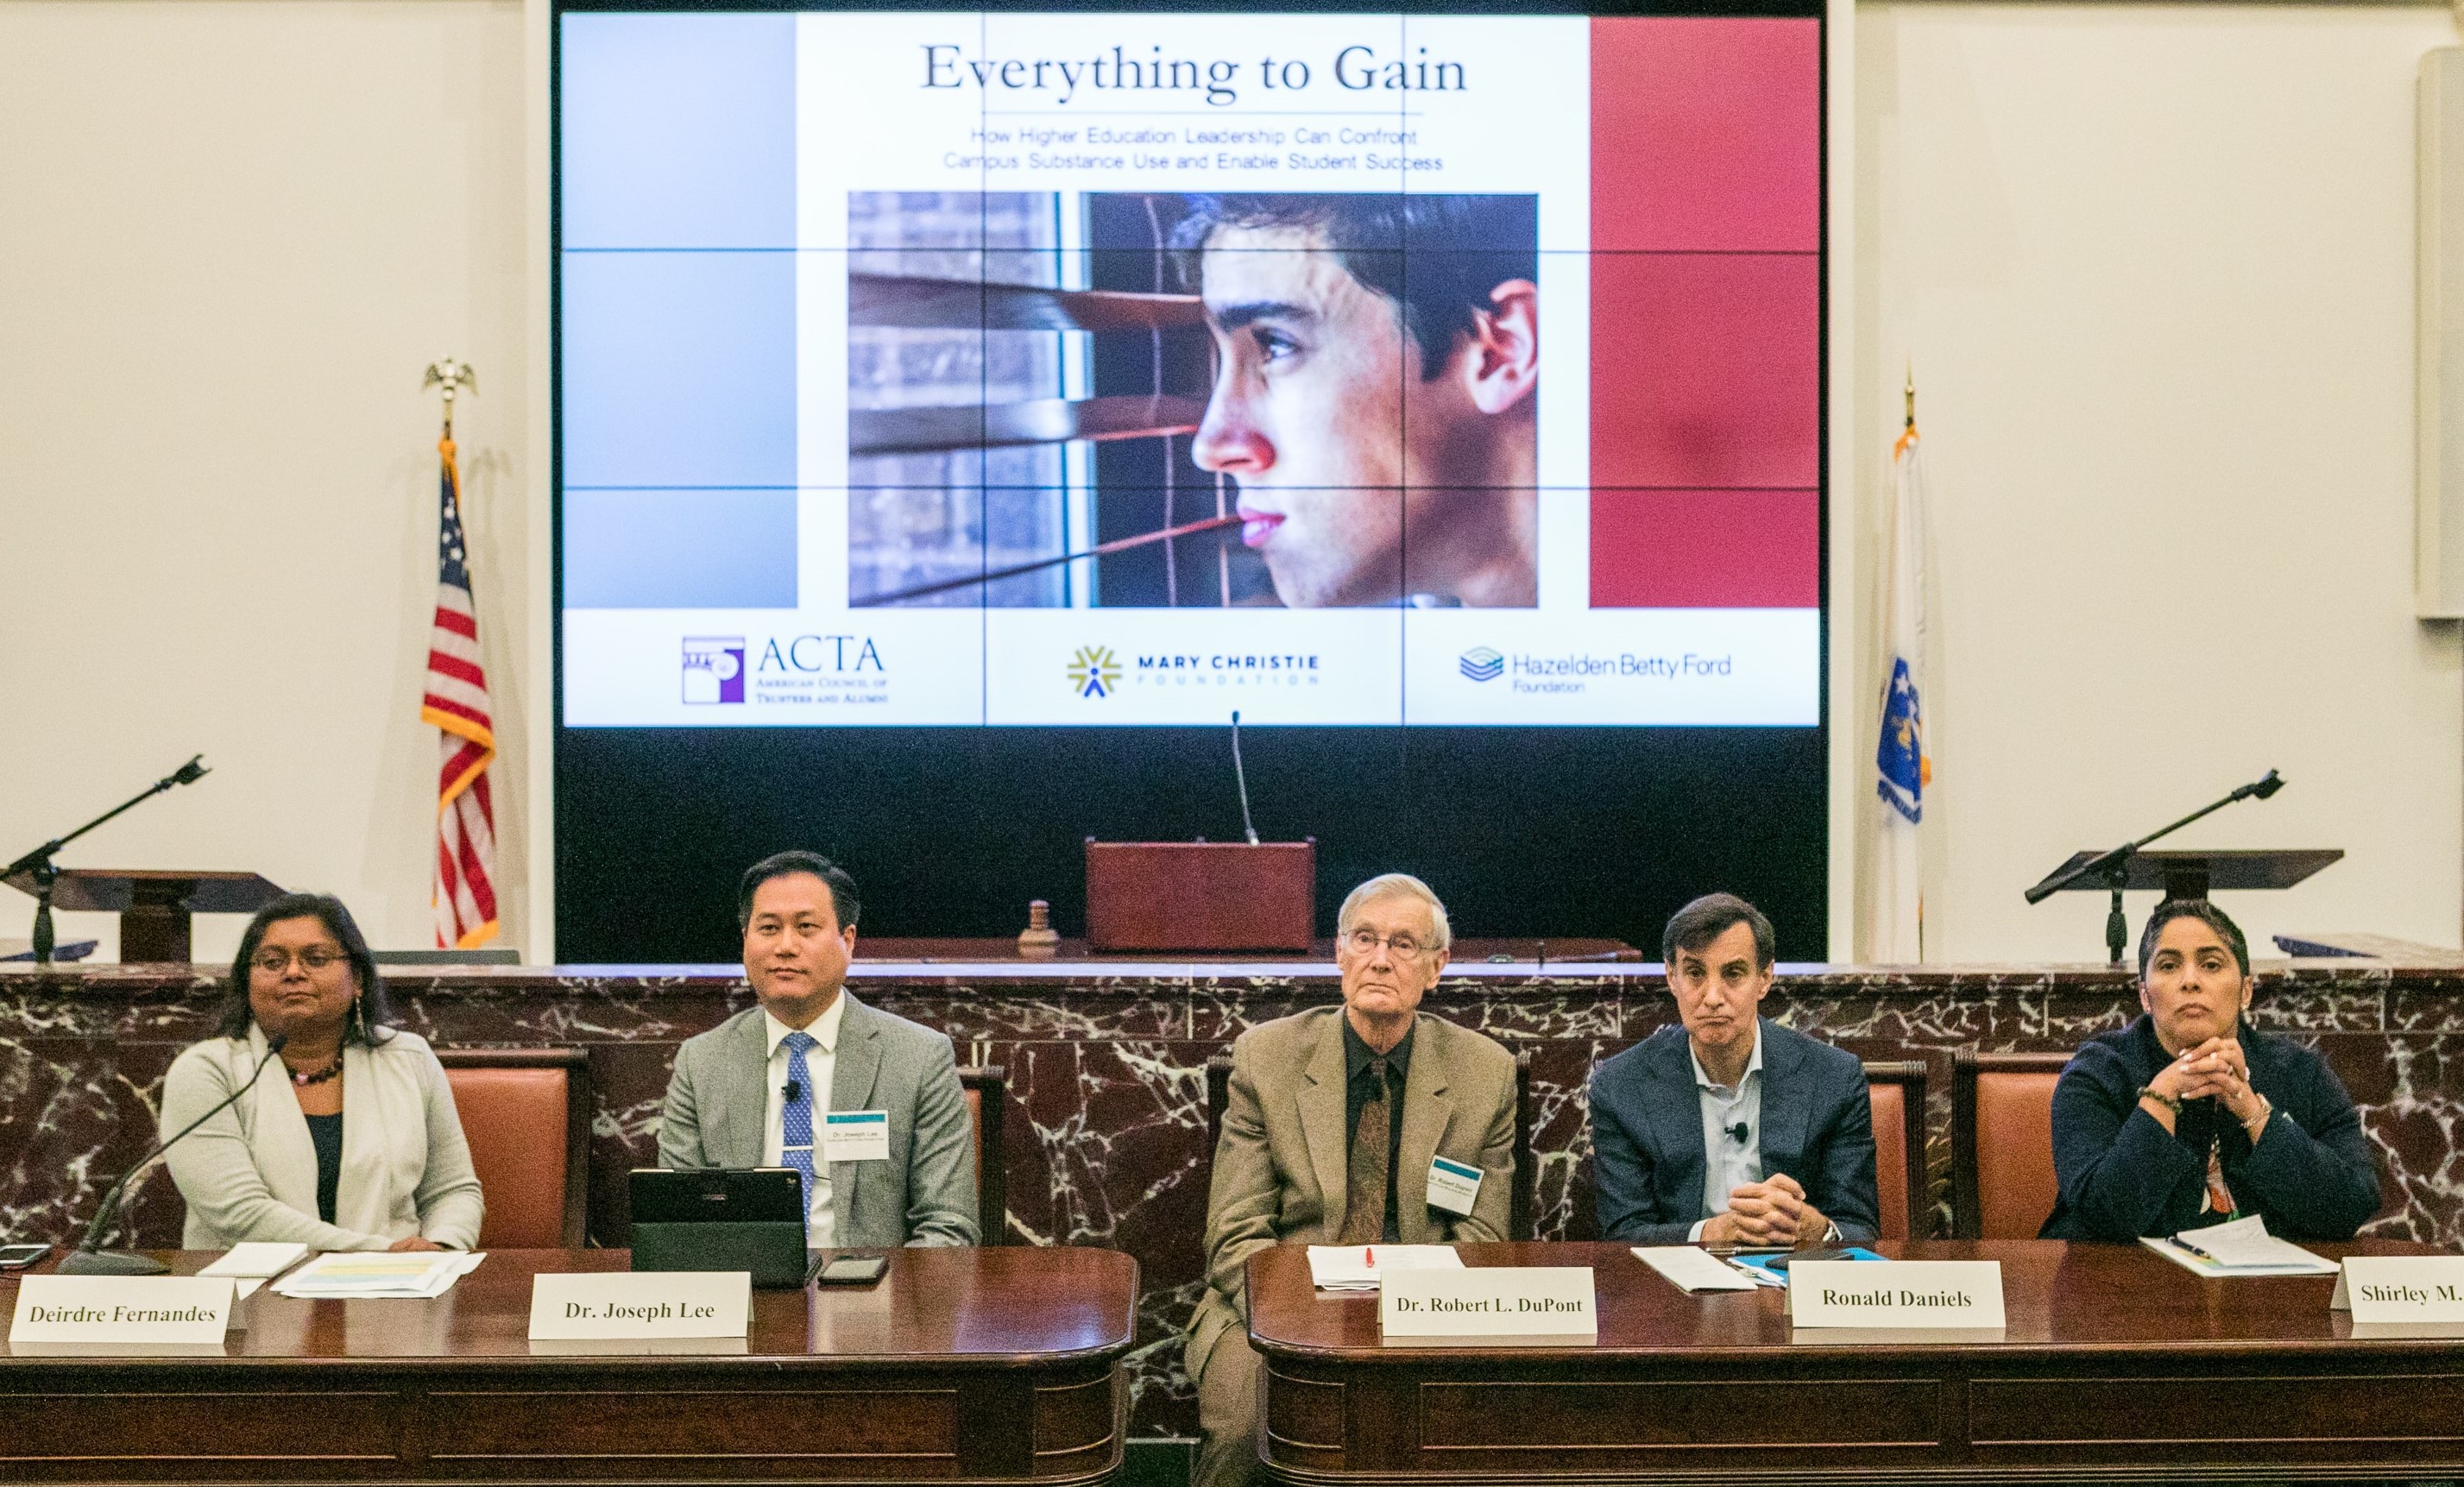 The morning panel at Everything to Gain, ACTA's conference on college drinking and drug use